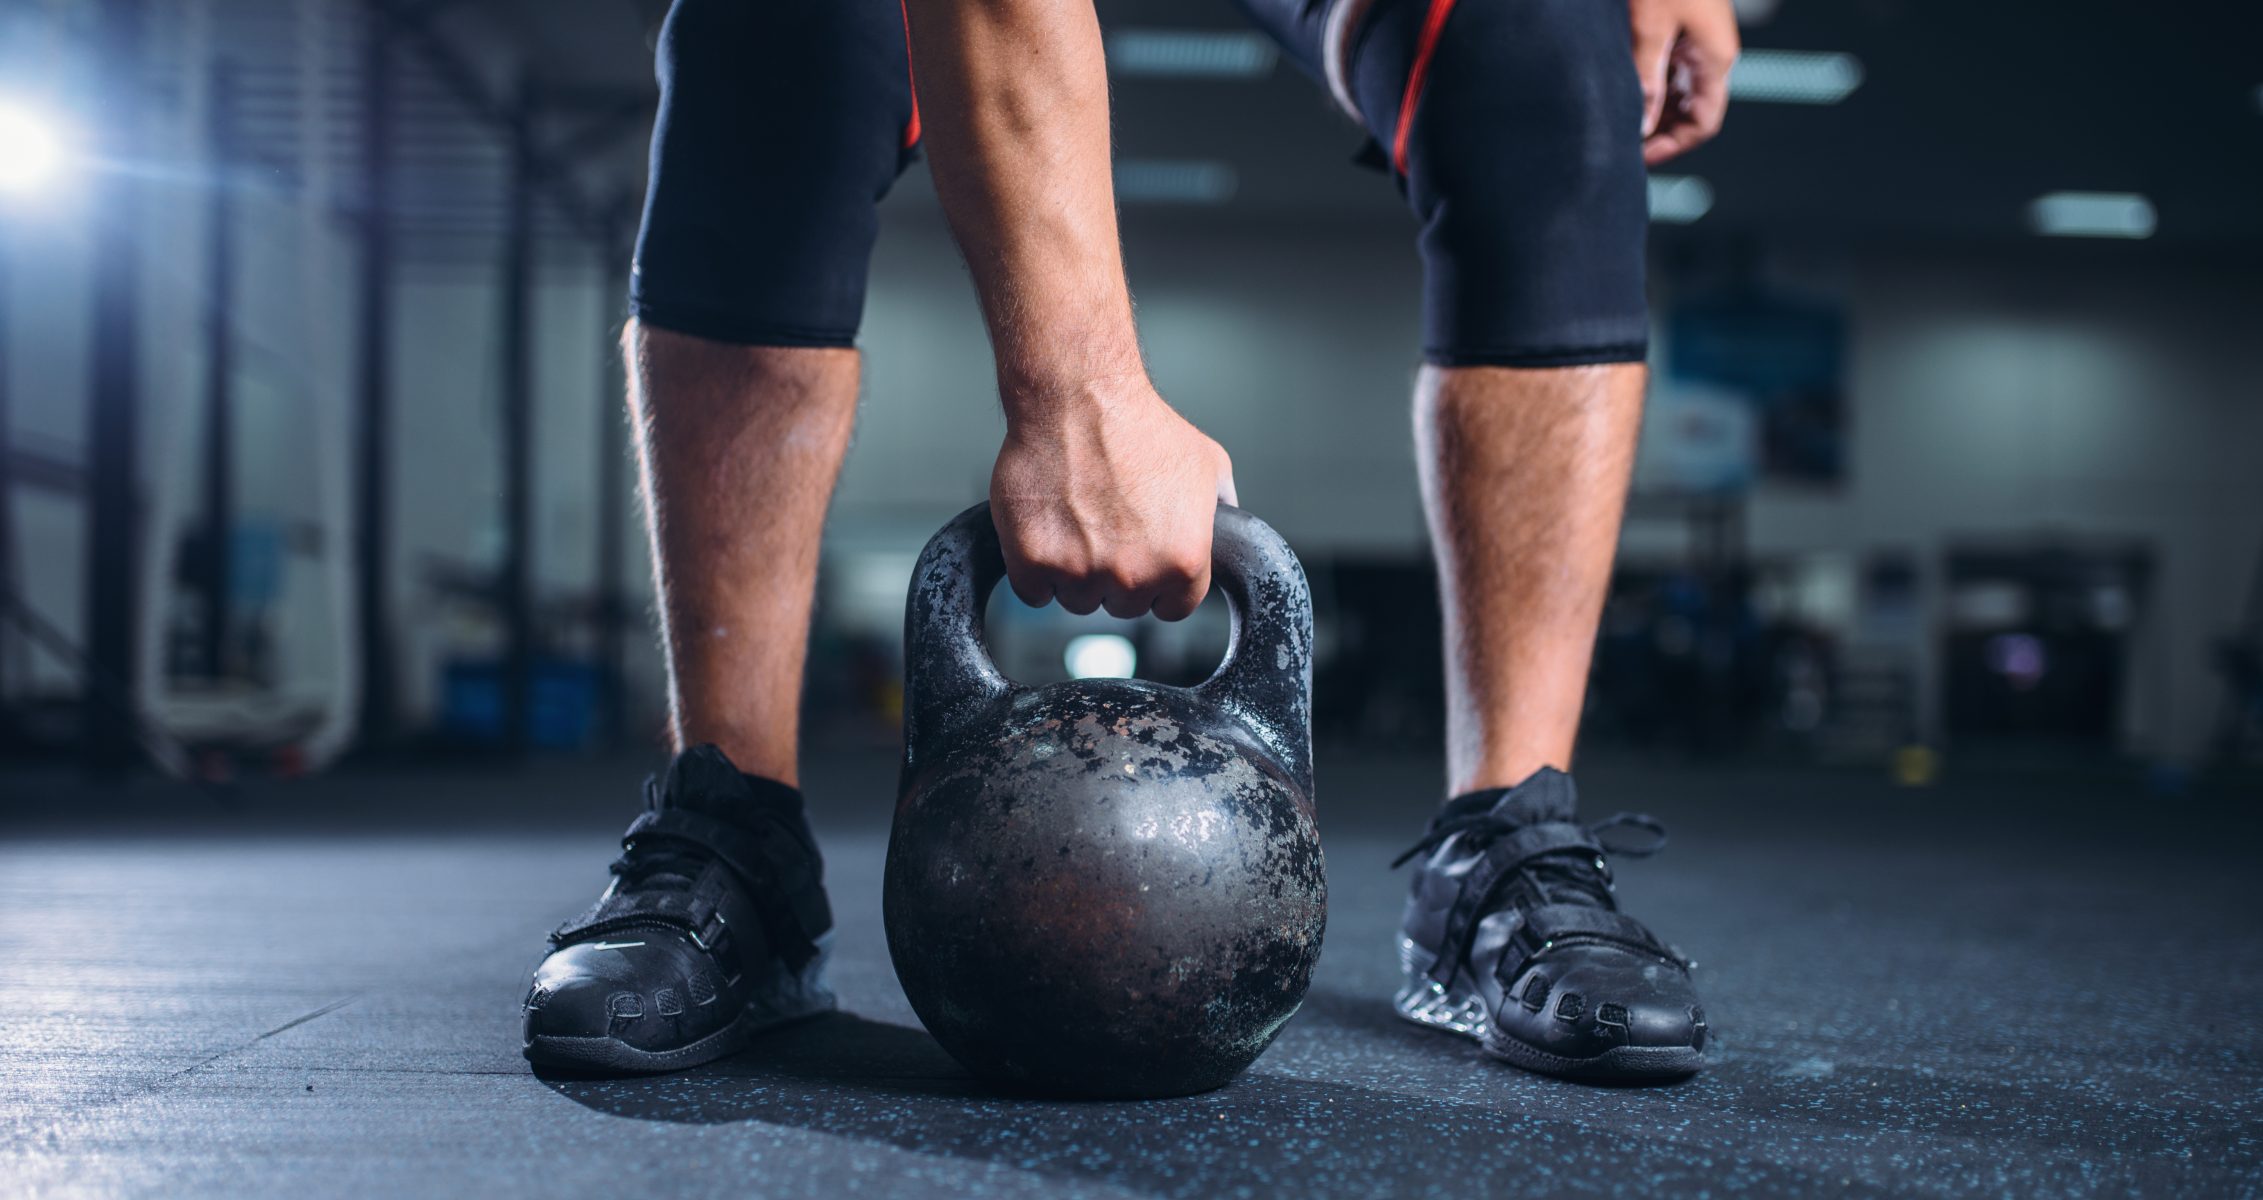 kettlebell exercises to build muscle